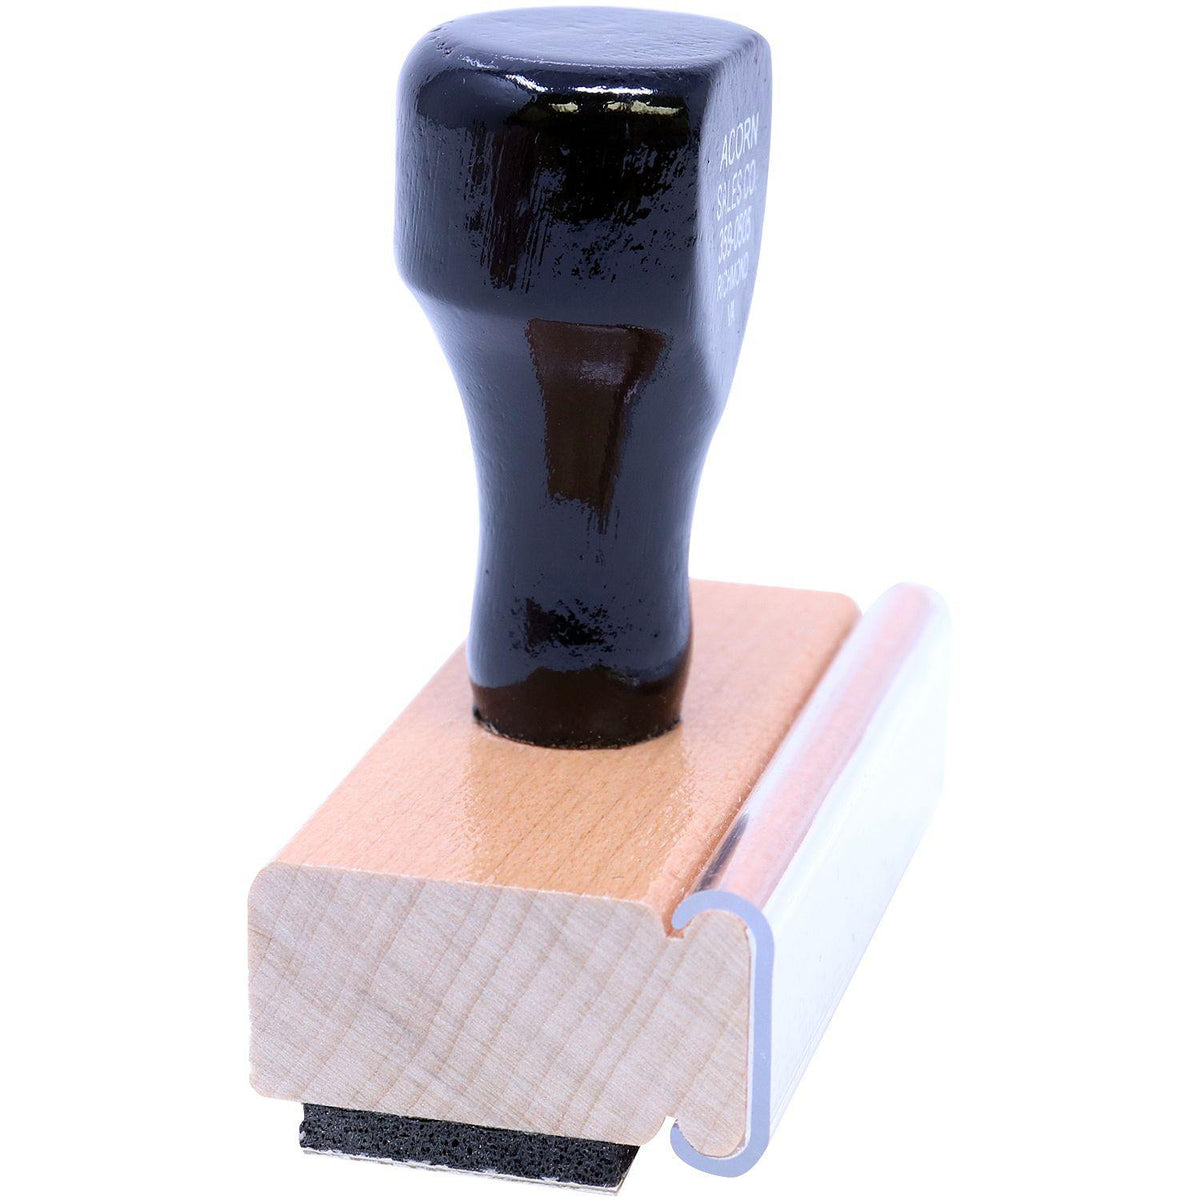 Side View of Large Account Closed Rubber Stamp at an Angle